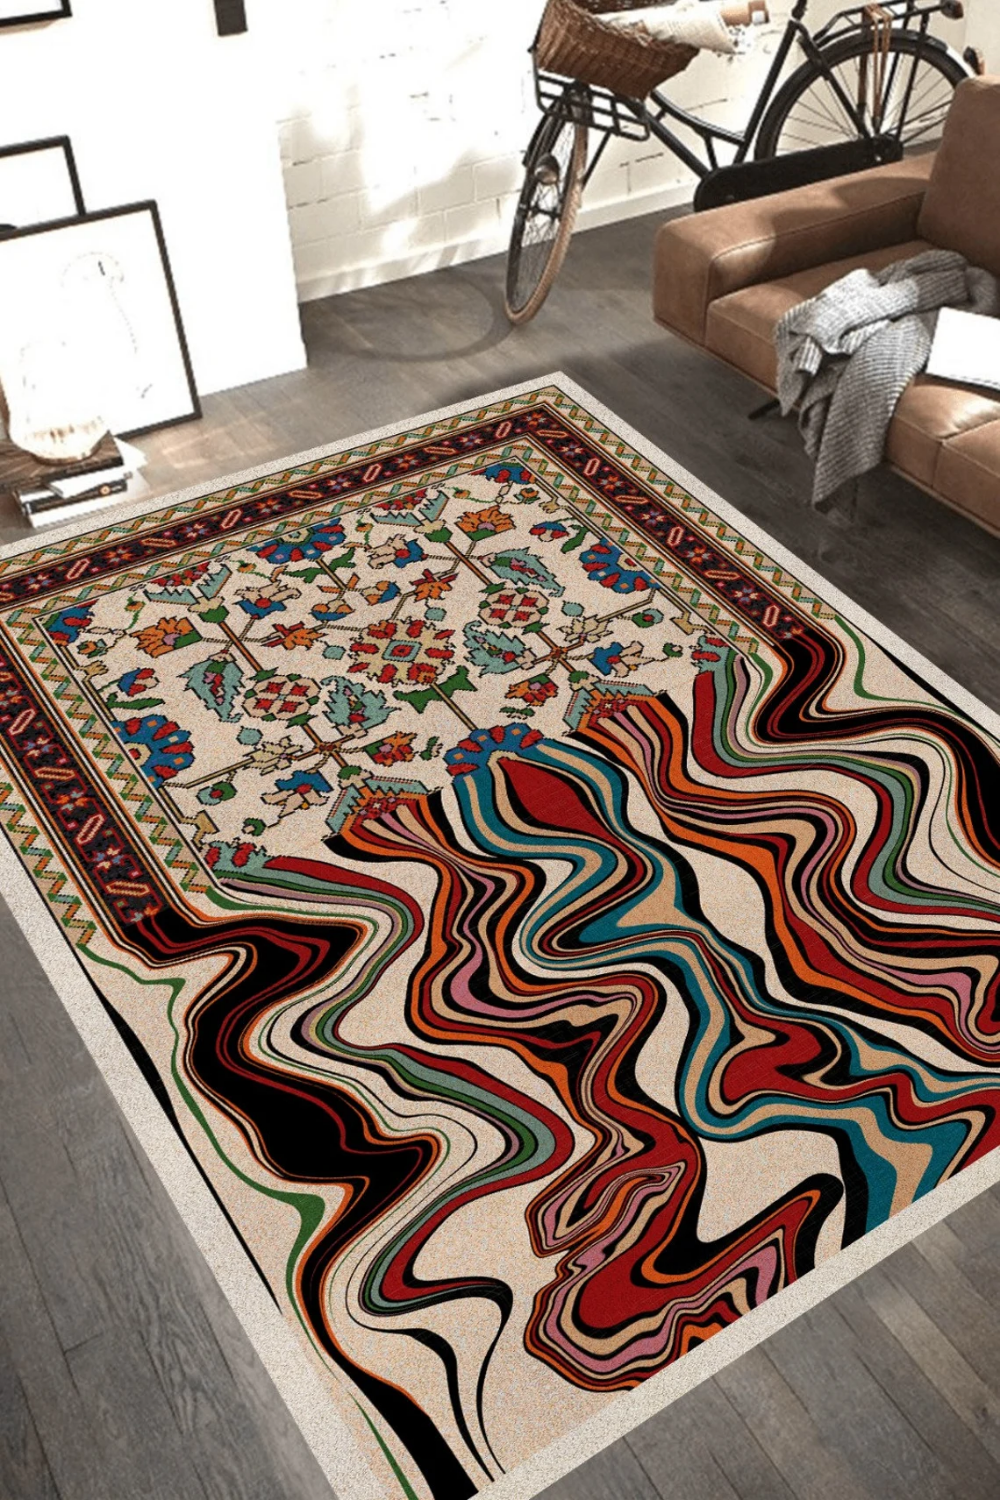 Large Area Rugs Choice for Elegance and Comfort in Home